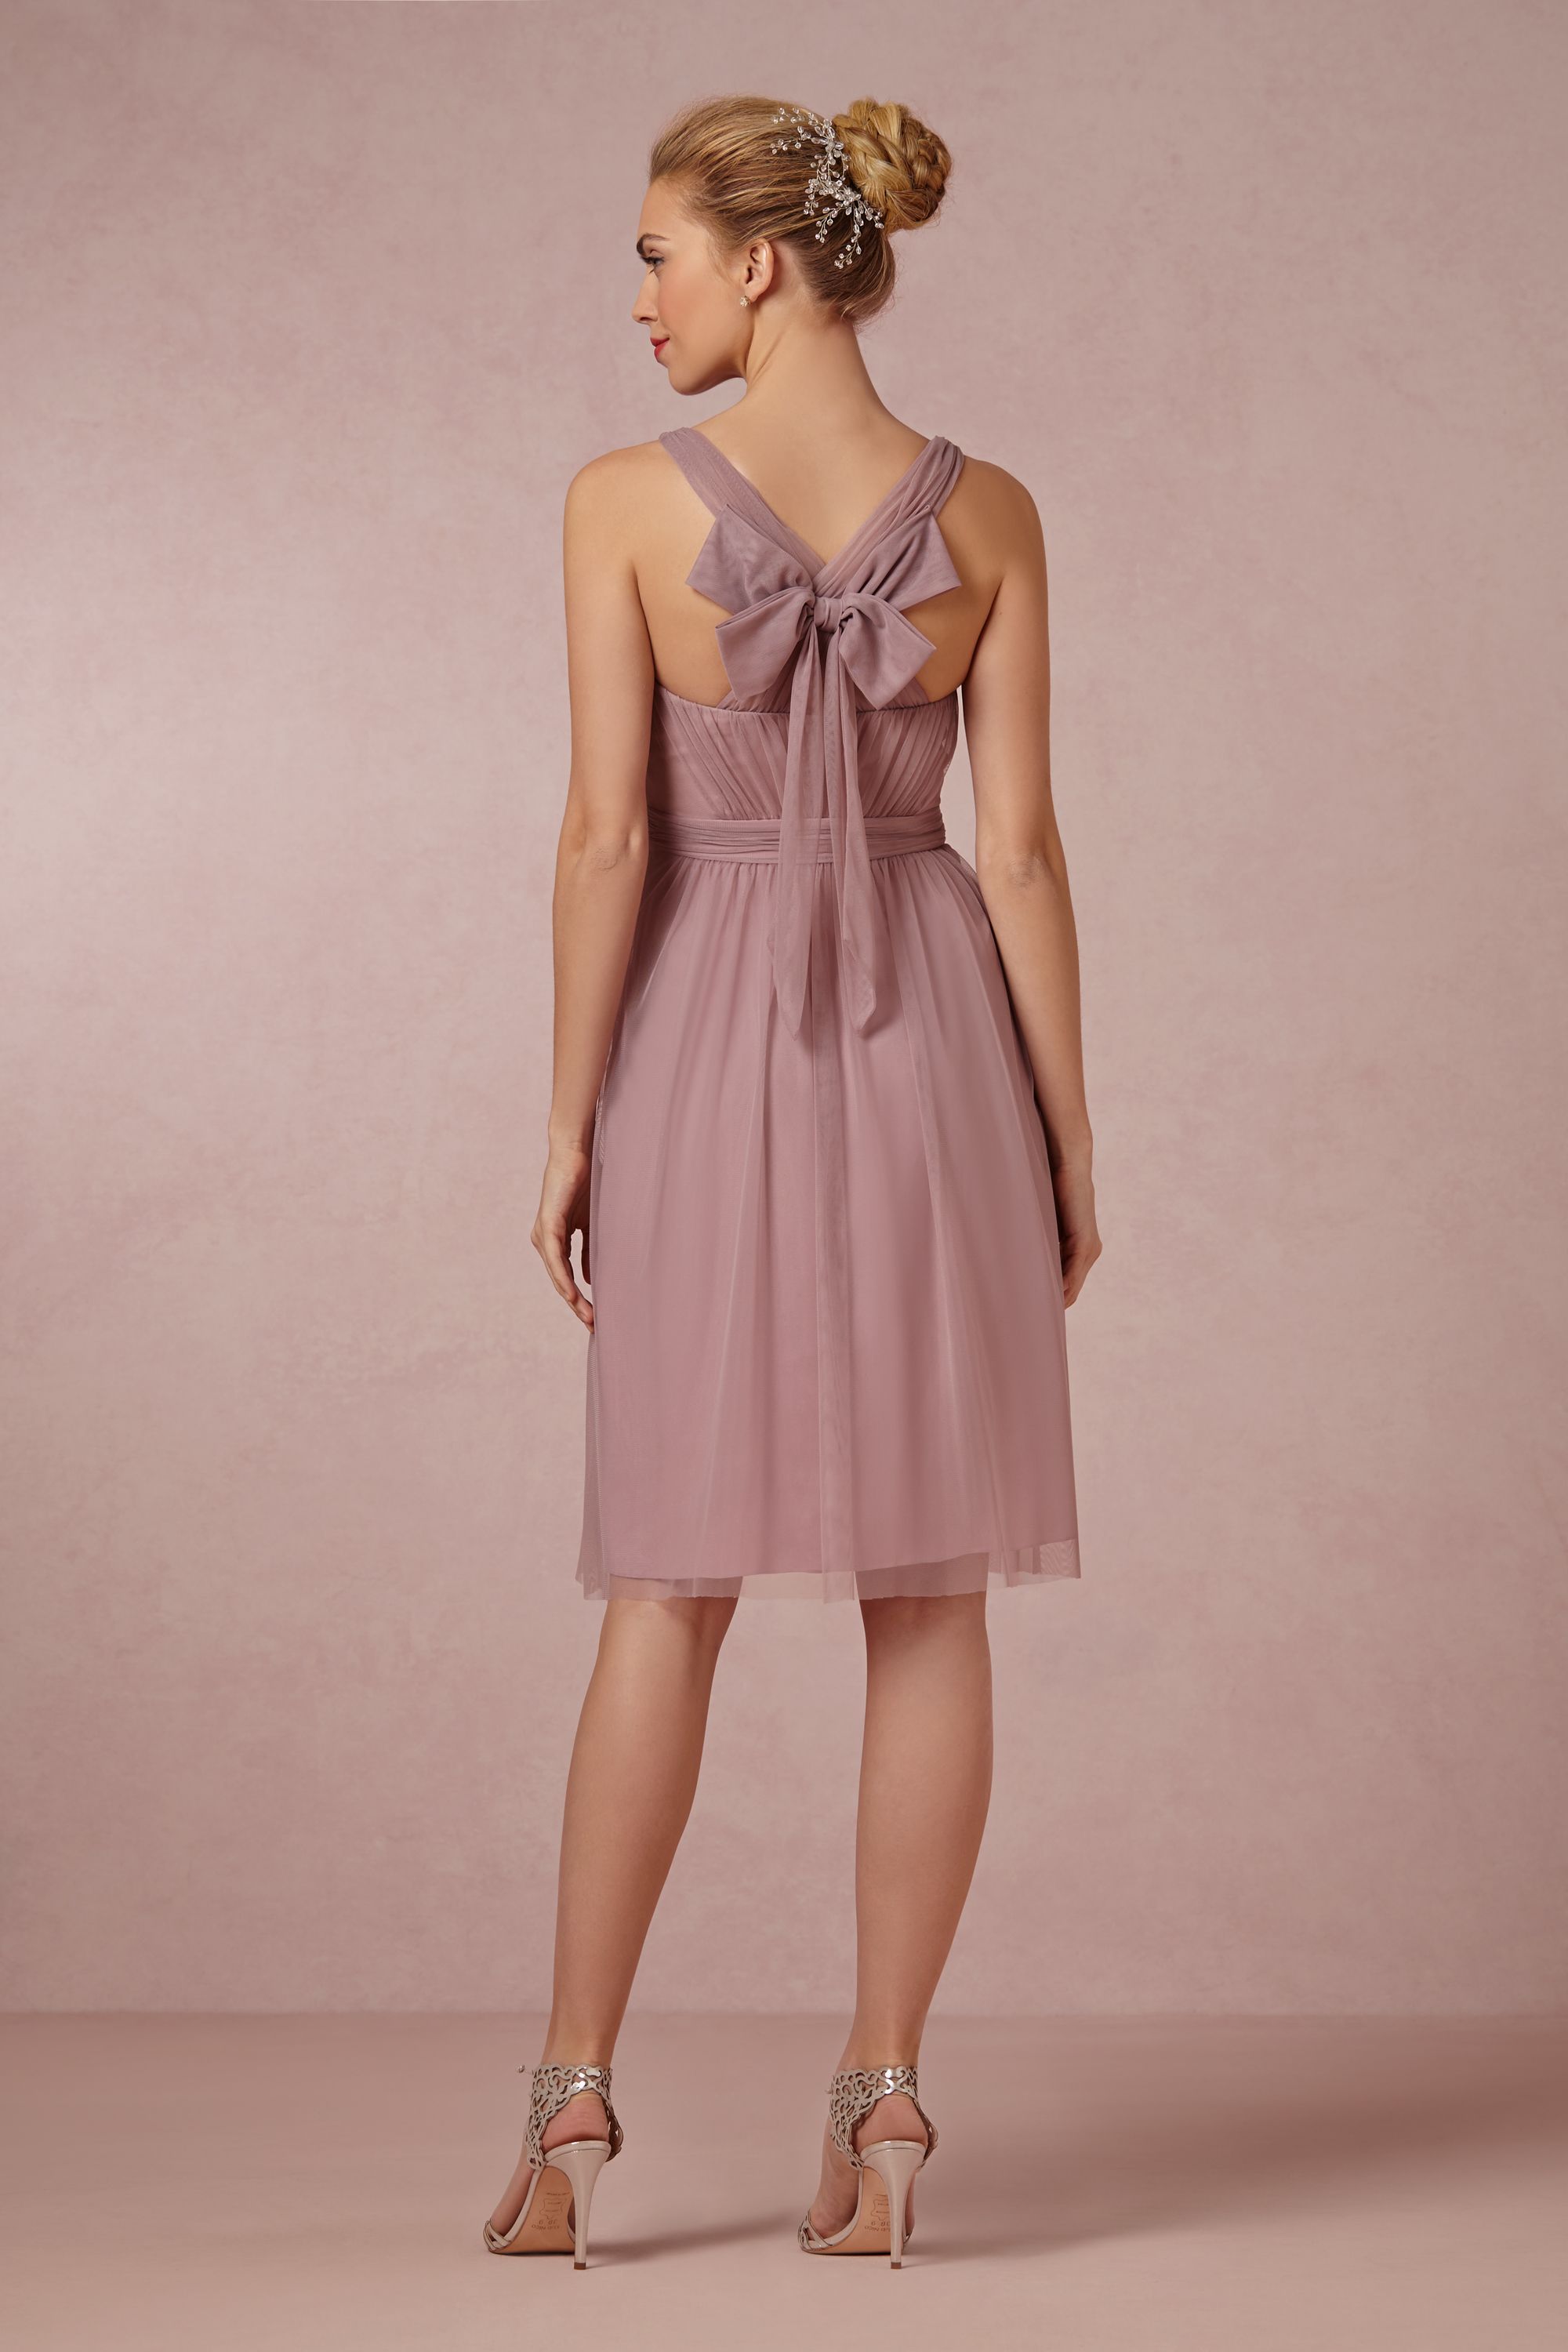 Tansy Dress in Sale | BHLDN